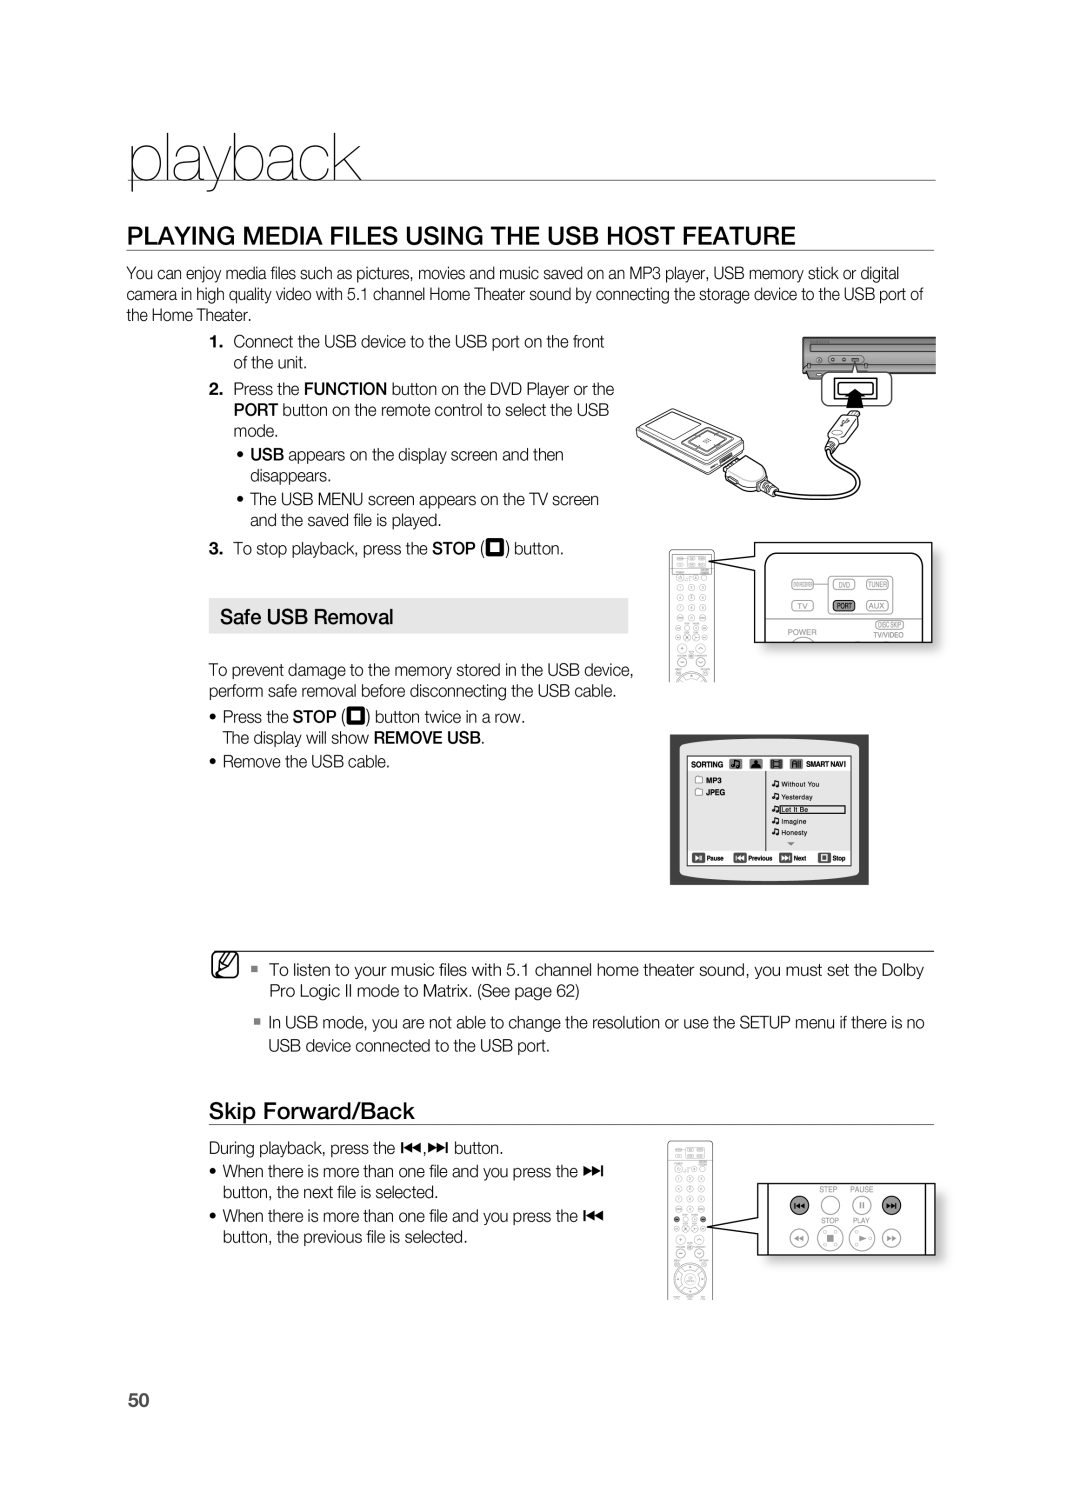 Samsung HT-TZ515 user manual PLAYINg MEDIA FILES USINg THE USB HOST FEATUrE, playback, Safe USB removal 